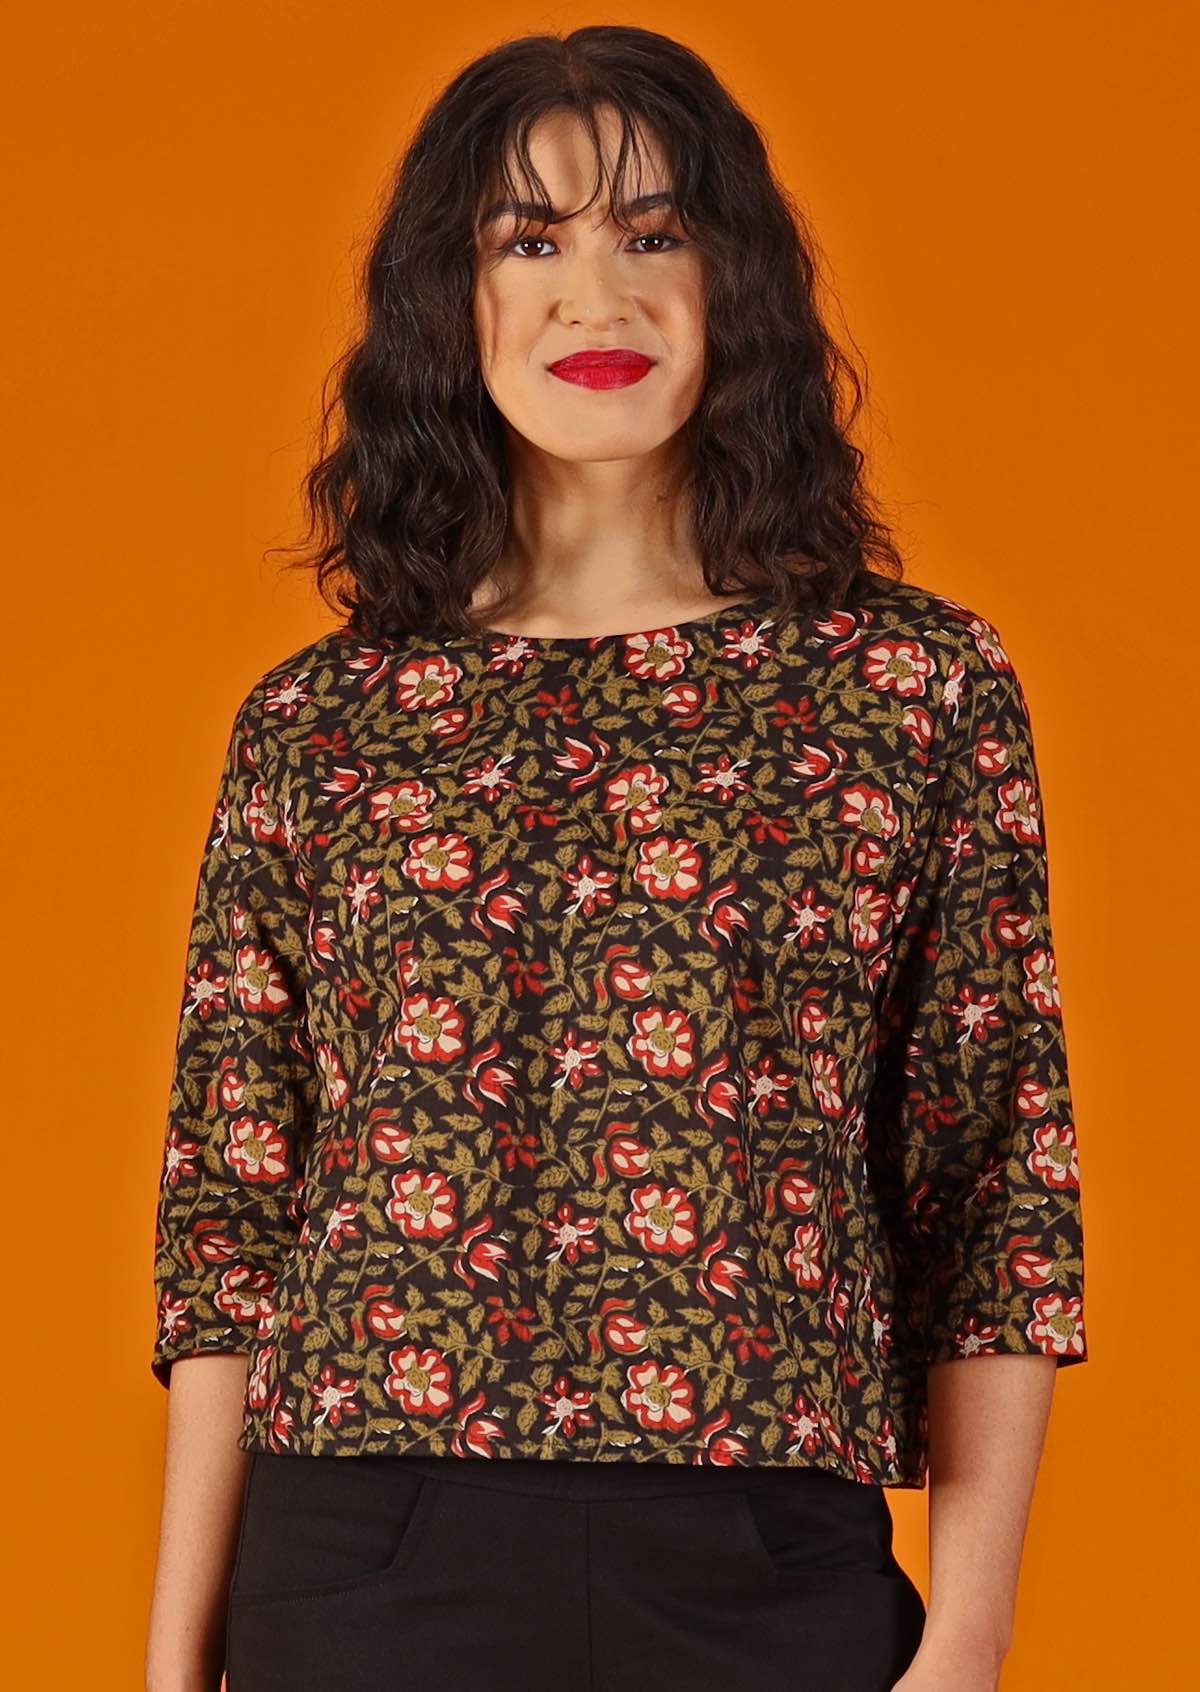 woman with dark hair and red lipstick in boxy cotton blouse, black with floral design  worn with black cotton pants